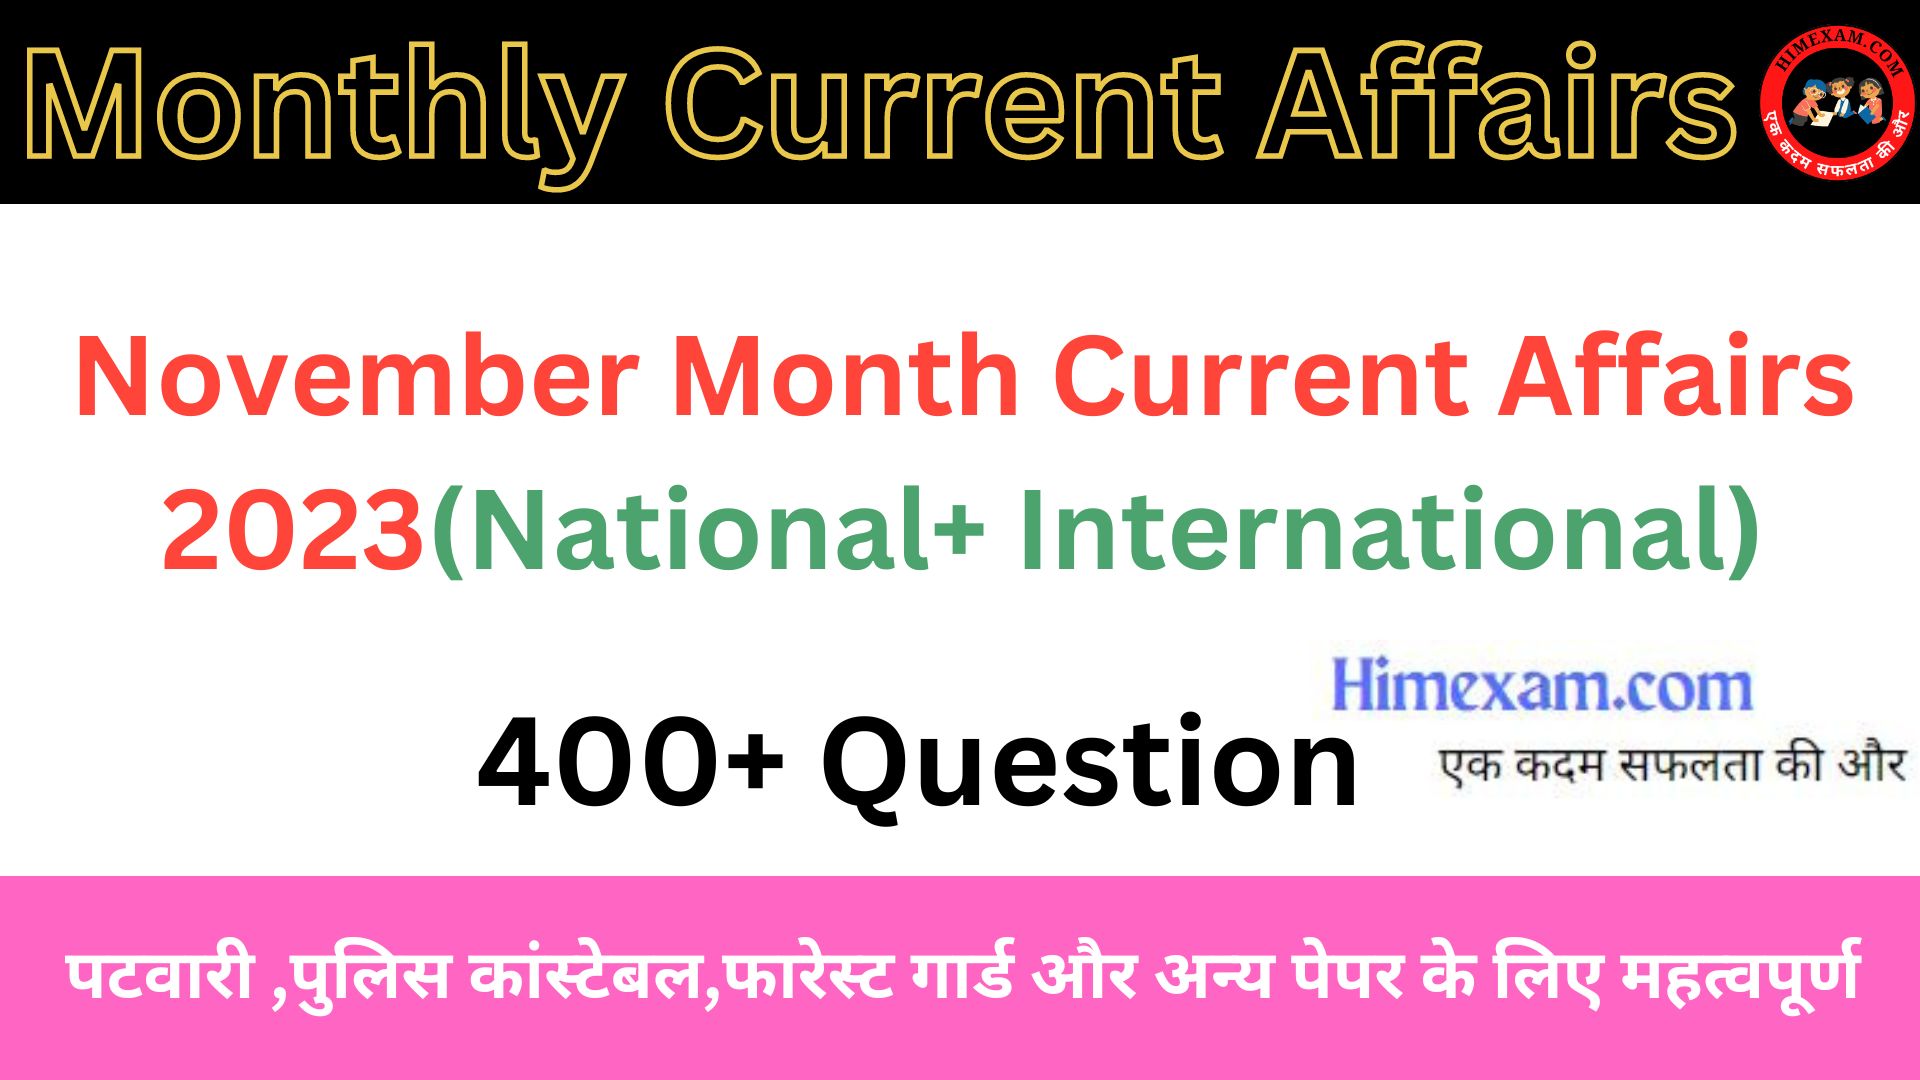 November Month Current Affairs 2023